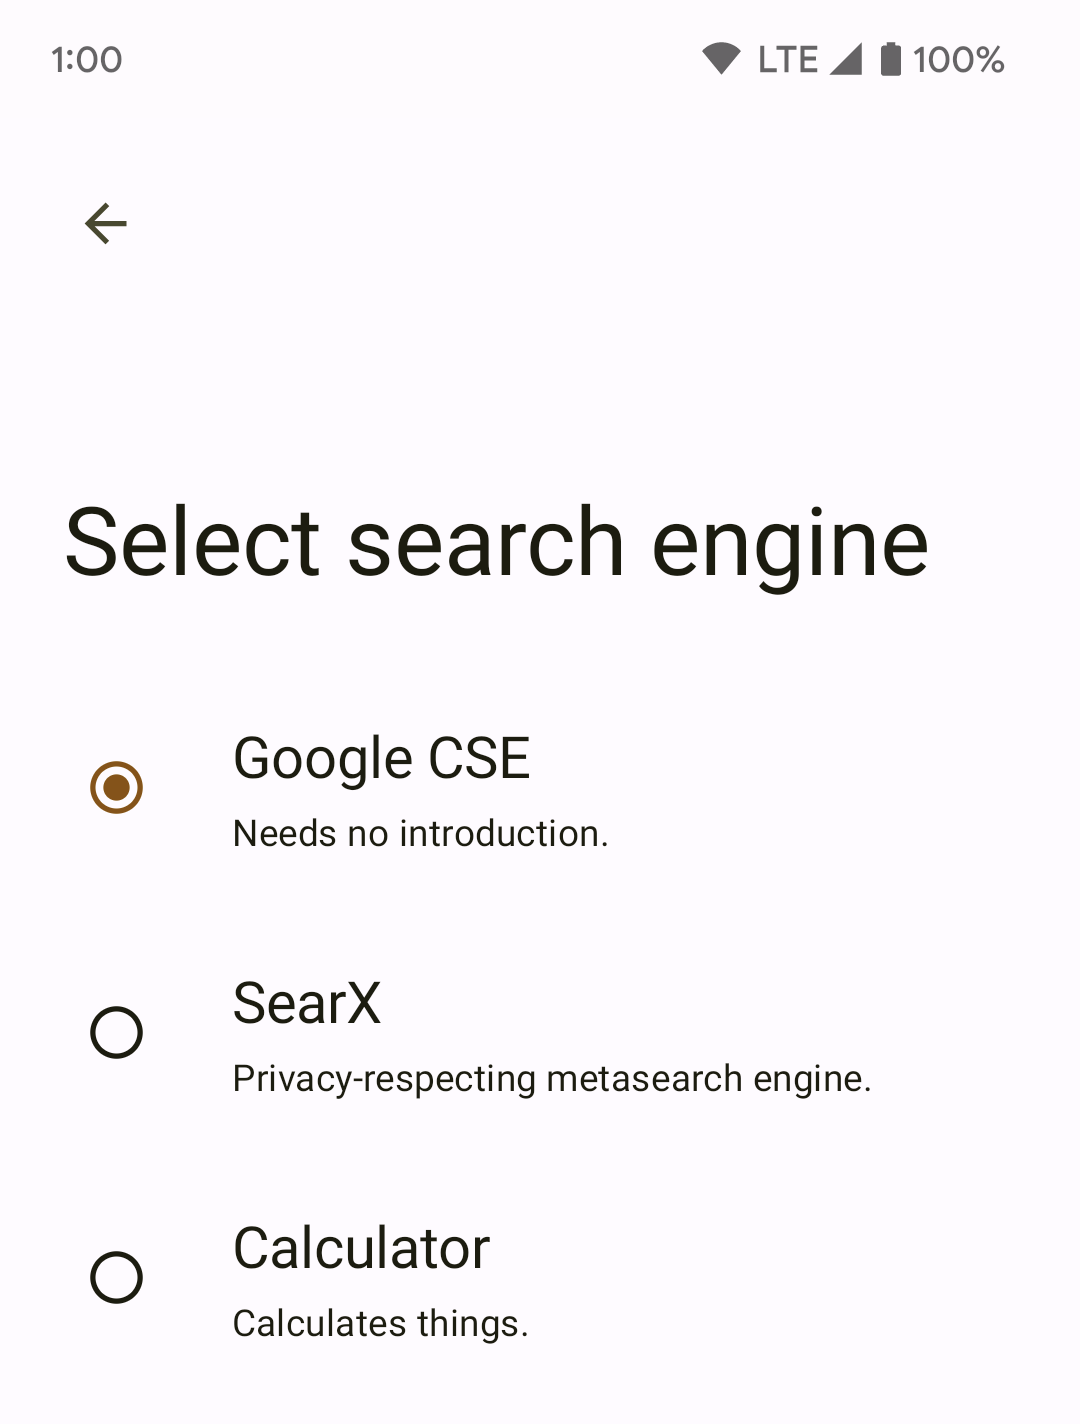 Image of Gugal's SERP provider selection page showing 3 providers: Google, SearX and Calculator